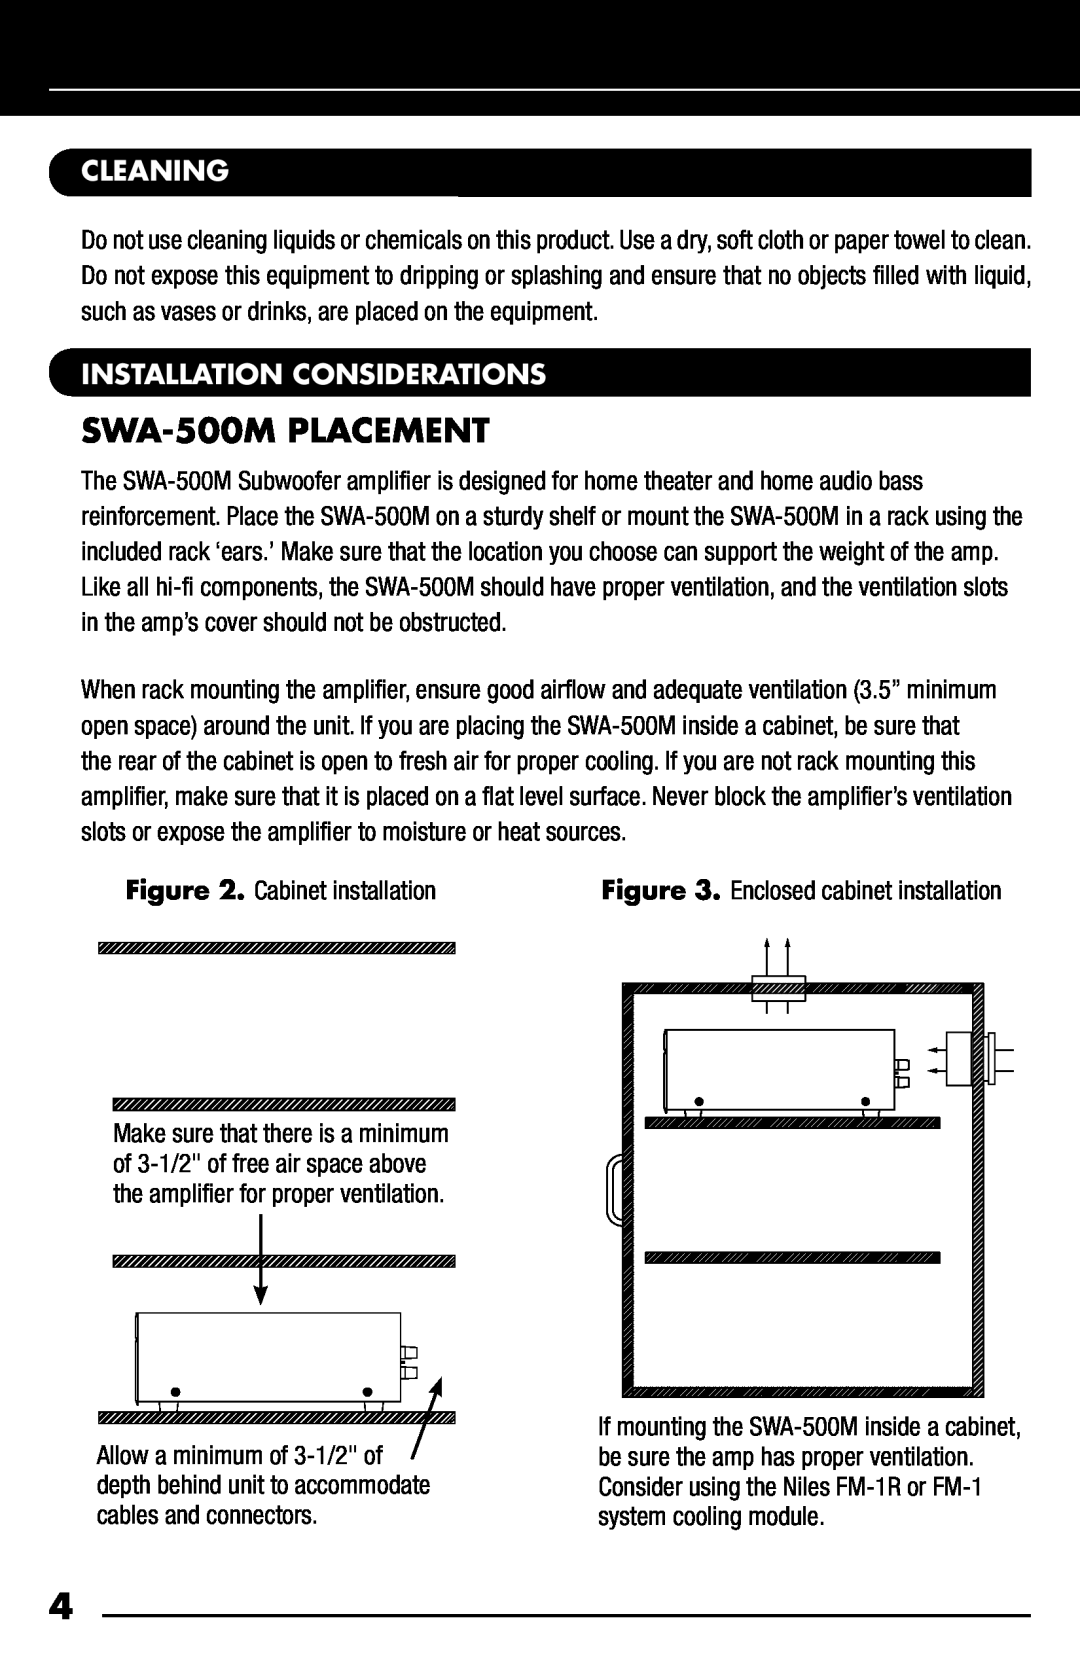 Niles Audio manual SWA-500MPLACEMENT, Cleaning, Installation Considerations 